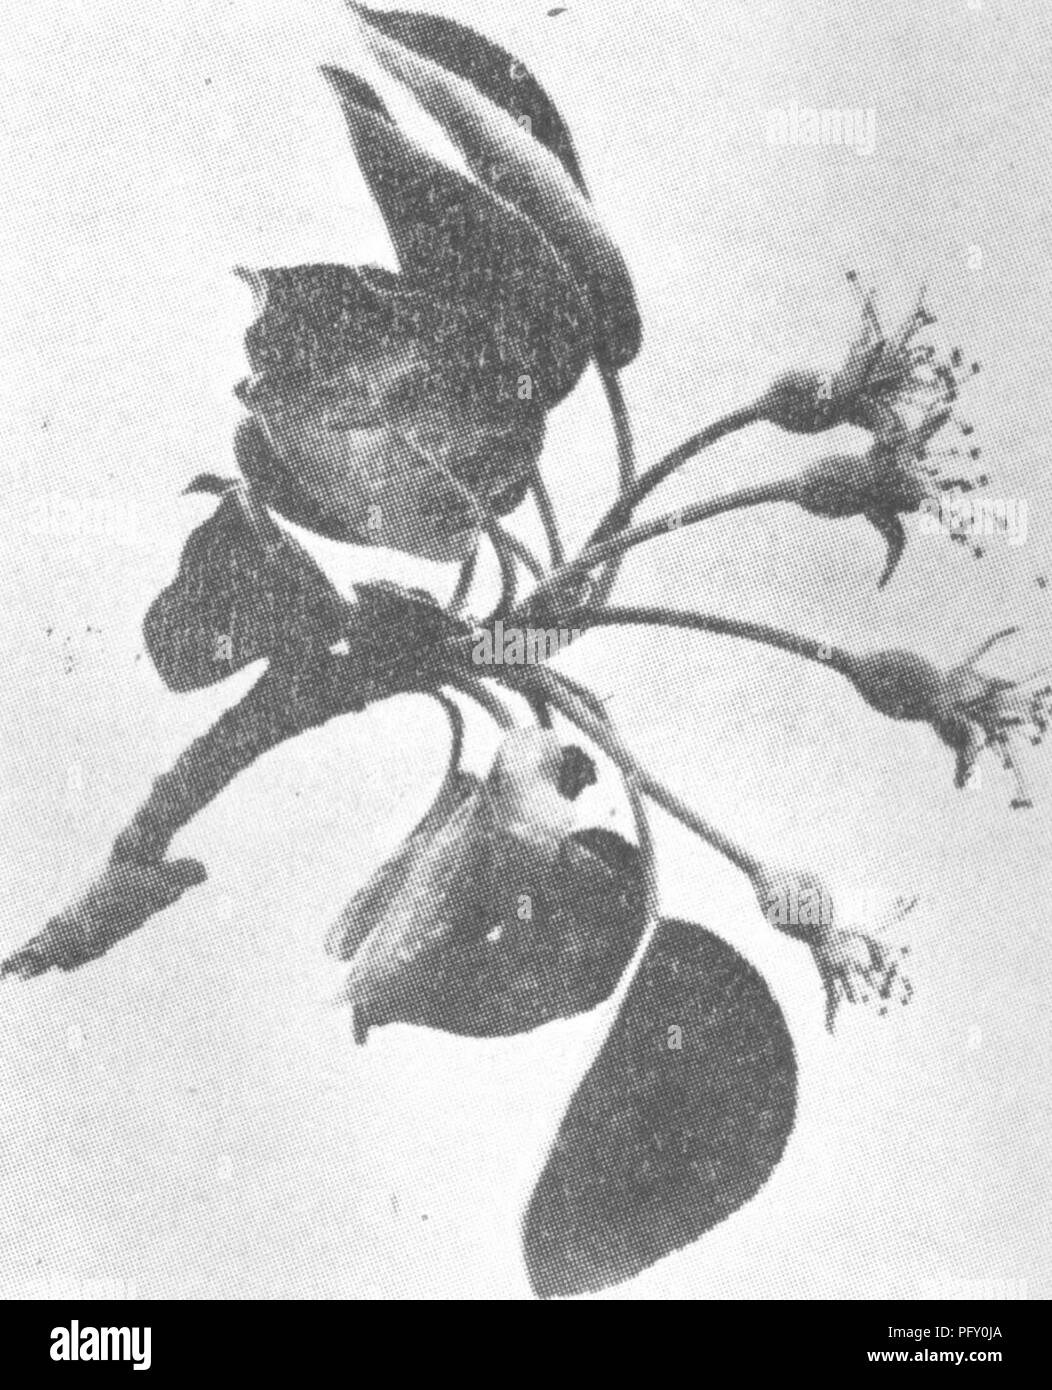 . The encyclopedia of practical horticulture; a reference system of commercial horticulture, covering the practical and scientific phases of horticulture, with special reference to fruits and vegetables;. Gardening; Fruit-culture; Vegetable gardening. Fig. 2. Showing Blossom Cluster Just After Petals Have Fallen. This is the time for the most important spraying for codling moth. Thoroughness of application at this time is absolutely essential. (Purdue Experiment Station) Potato growers are advised to pay par- ticular attention to the matter of pre- venting Rhizoctonia infection on pota- toes.  Stock Photo